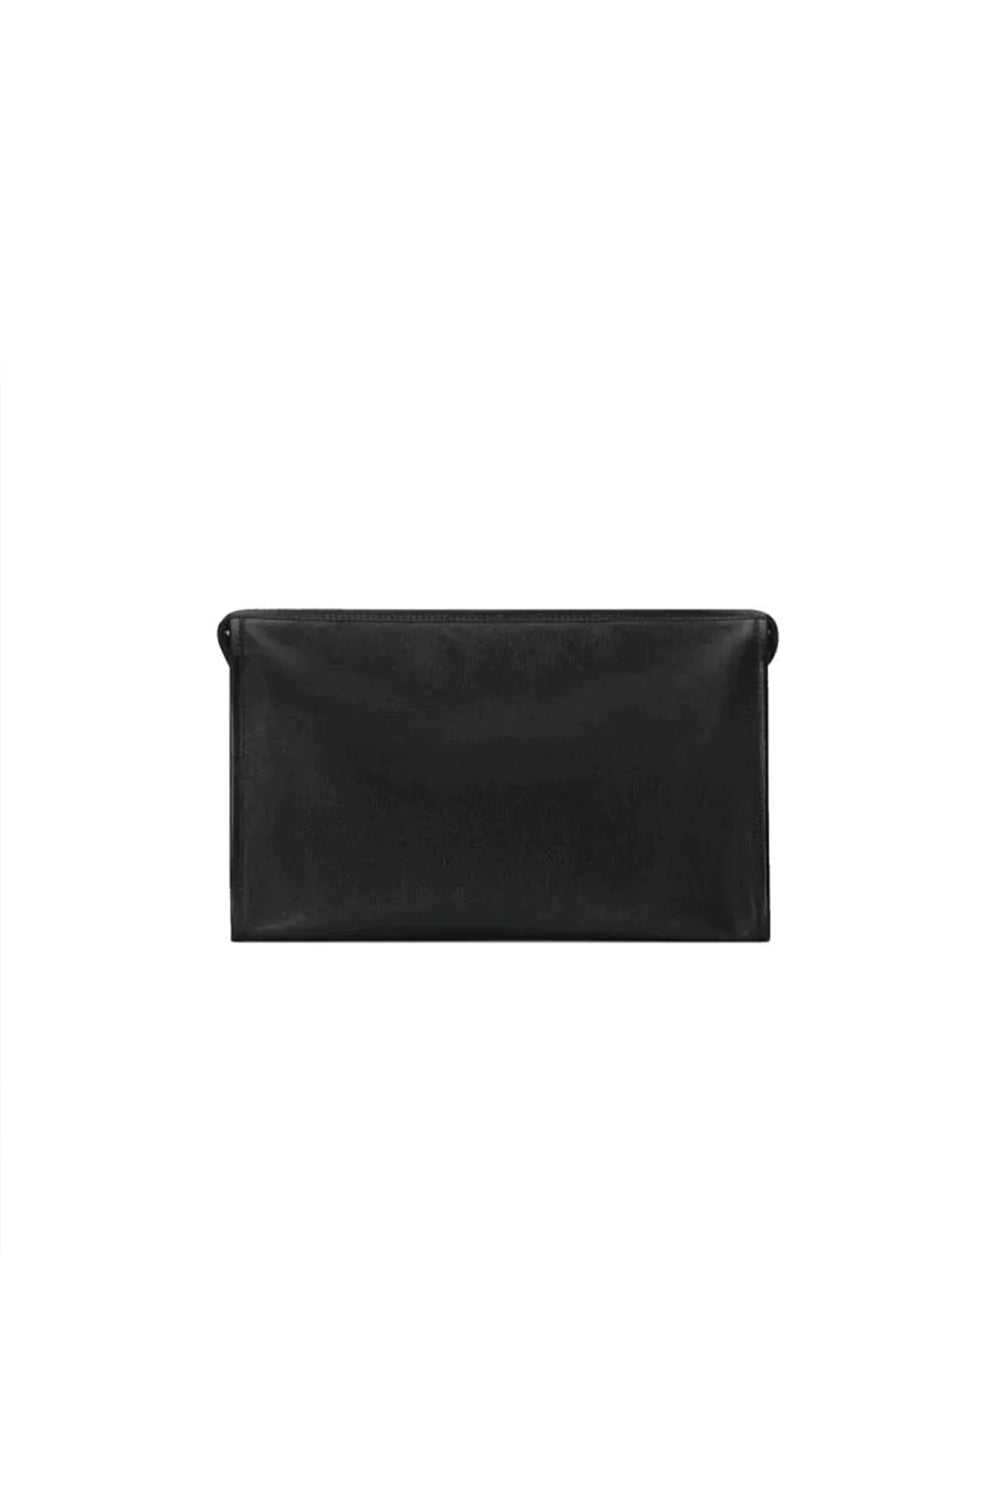 Gucci Morpheus Fluffy Calf Leather Cosmetic Pouch Bag